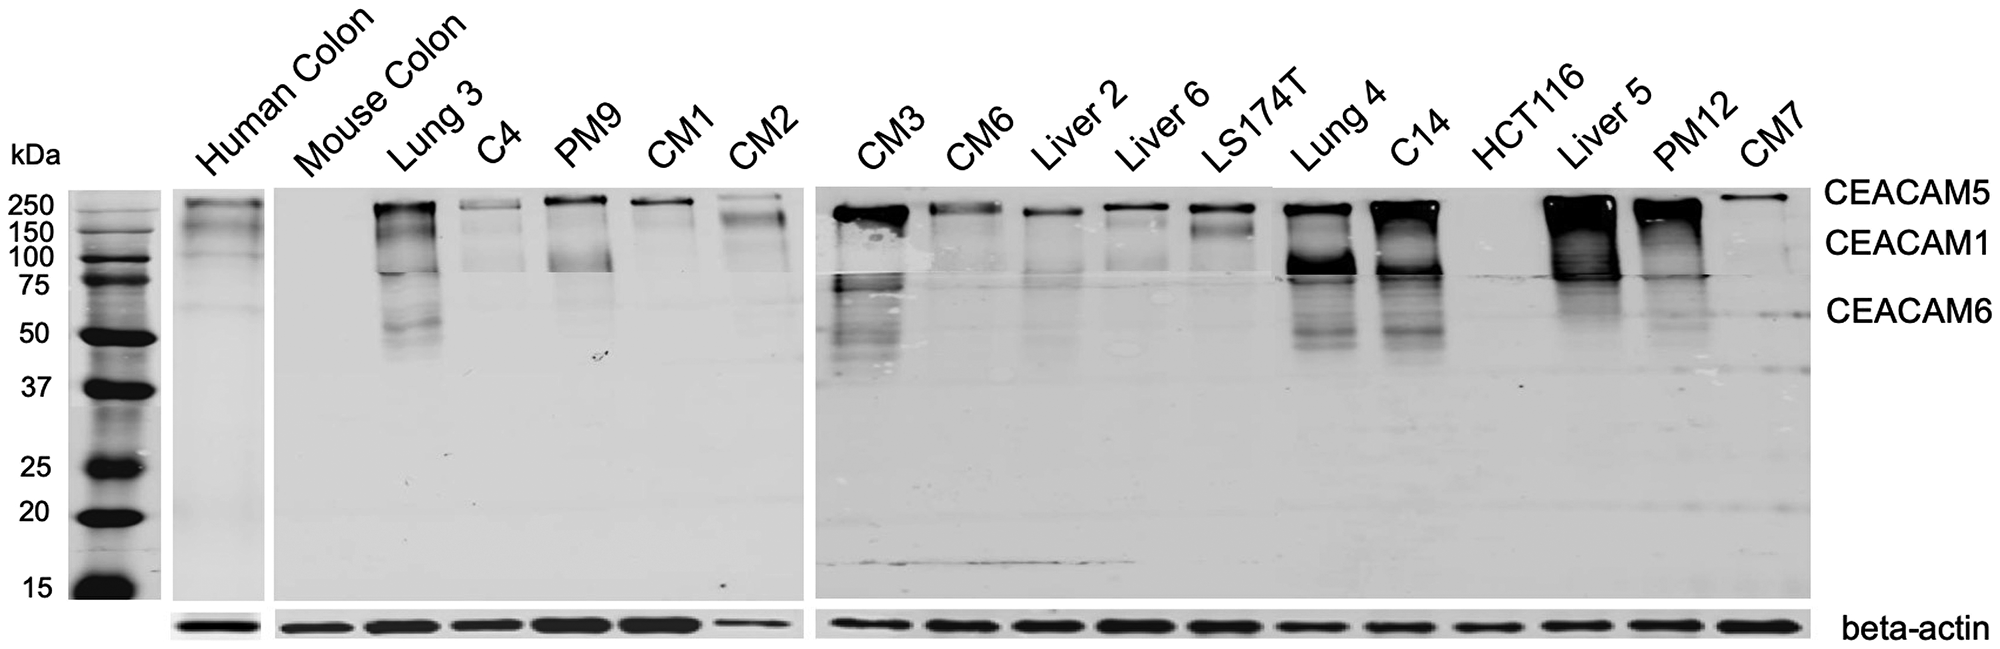 Whole membrane western blot of 6G5j-IR800CW for CEACAM expression in colon cancer lysates.